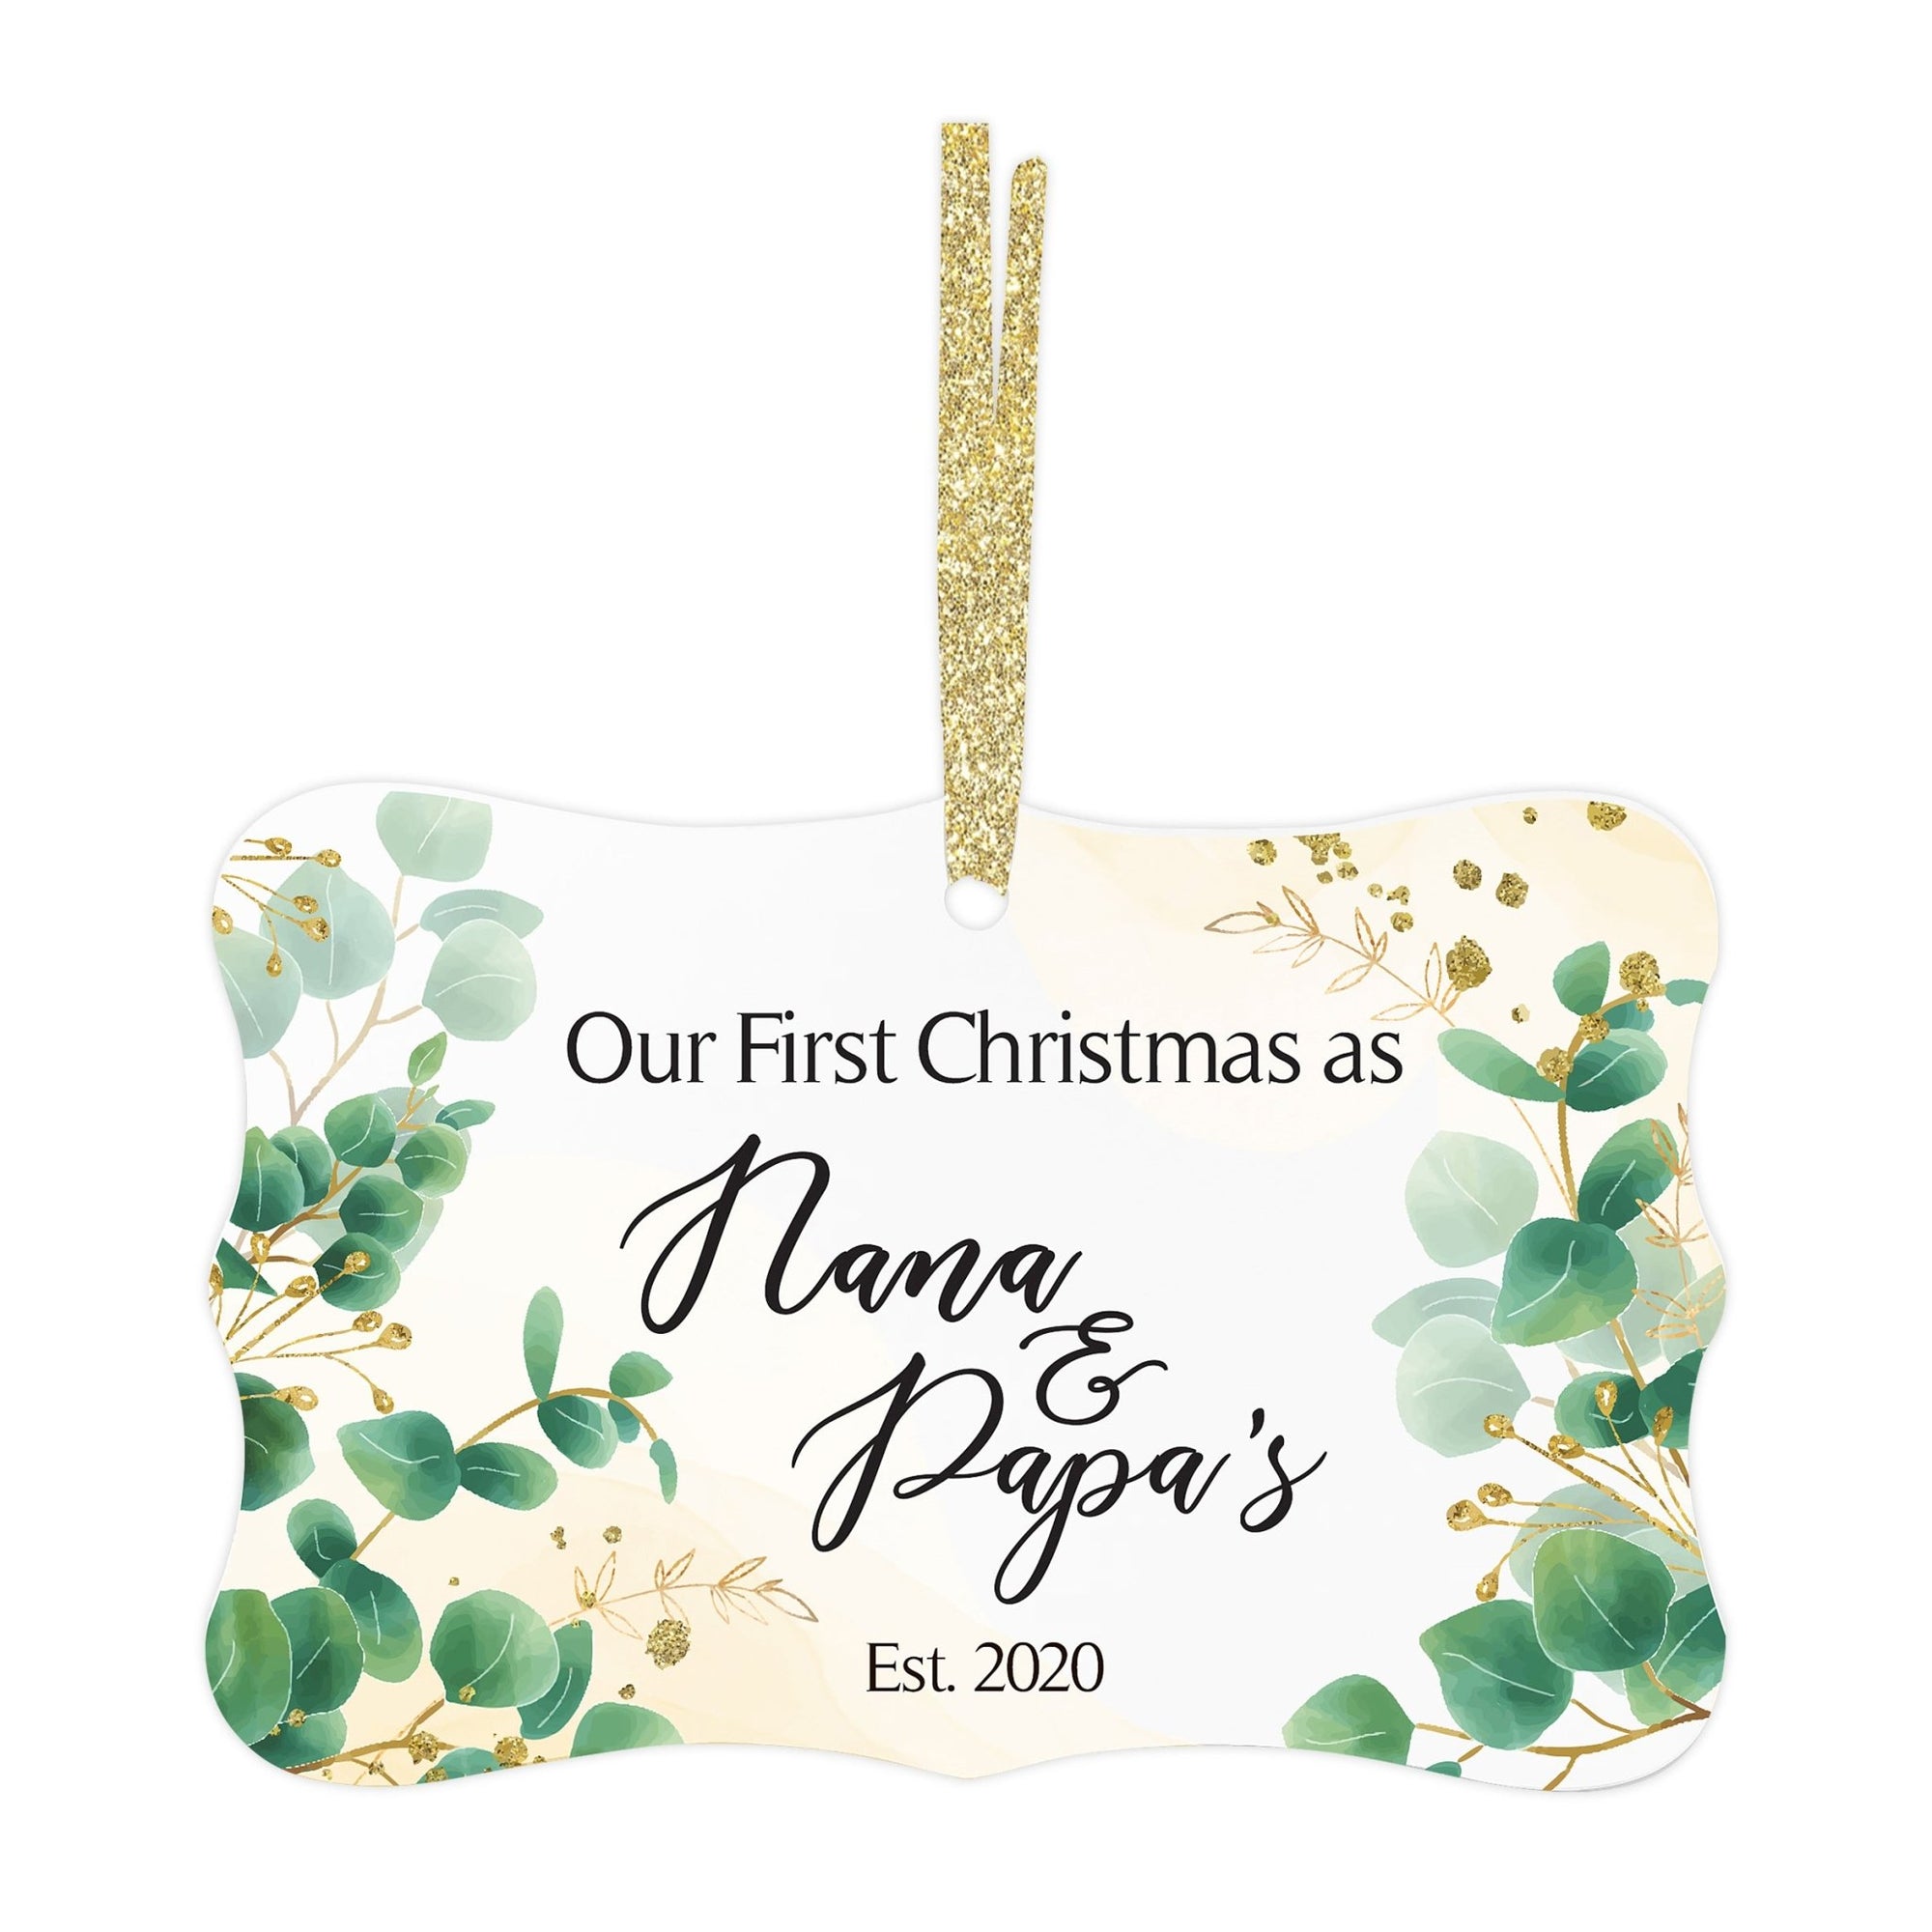 Personalized Modern 4x2.5in Christmas White Scalloped Ornament for Grandparents - Our First Christmas - LifeSong Milestones